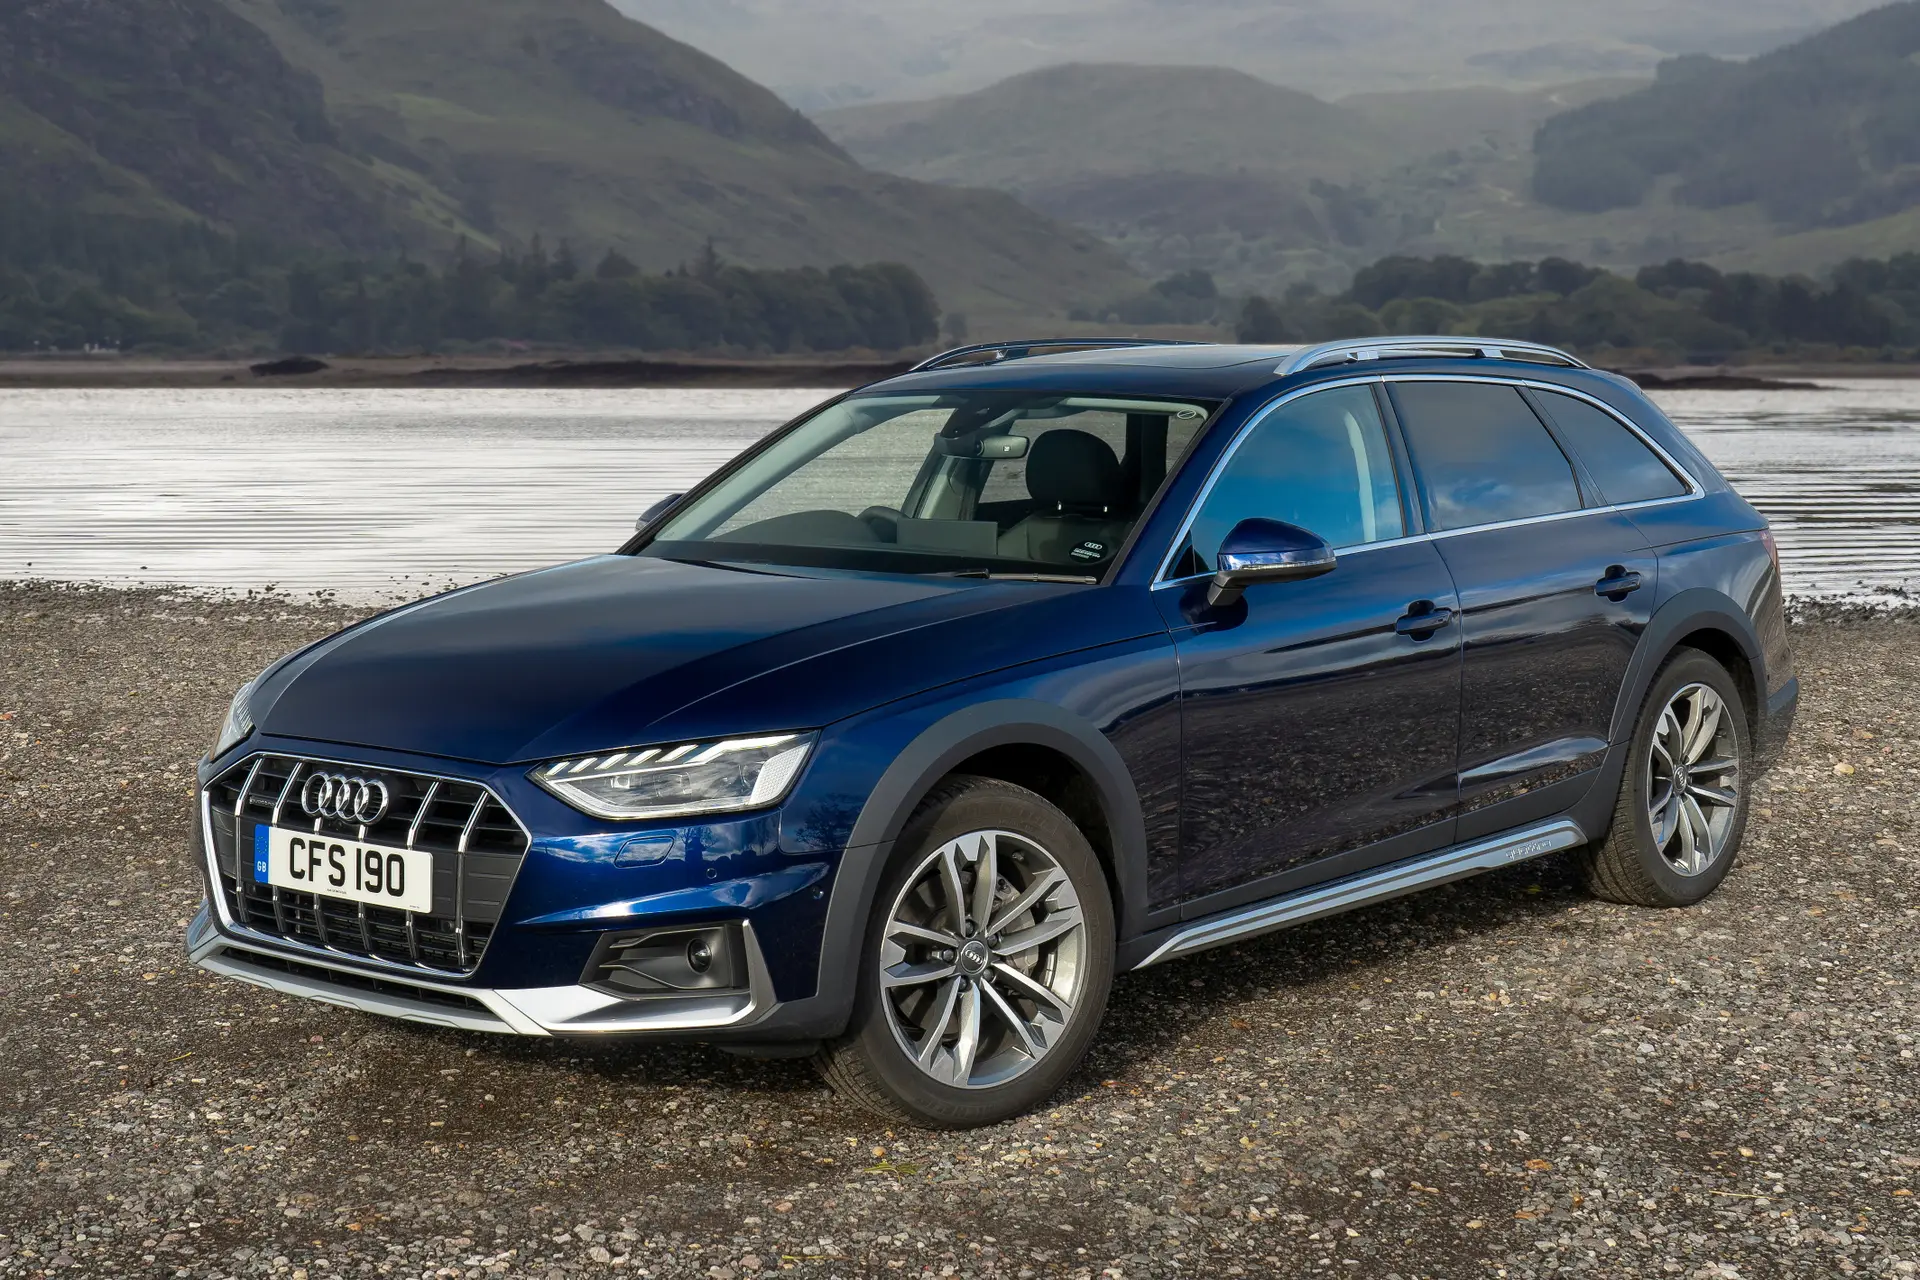 Audi A4 Allroad Review 2023: exterior front three quarter image of the Audi A4 Allroad